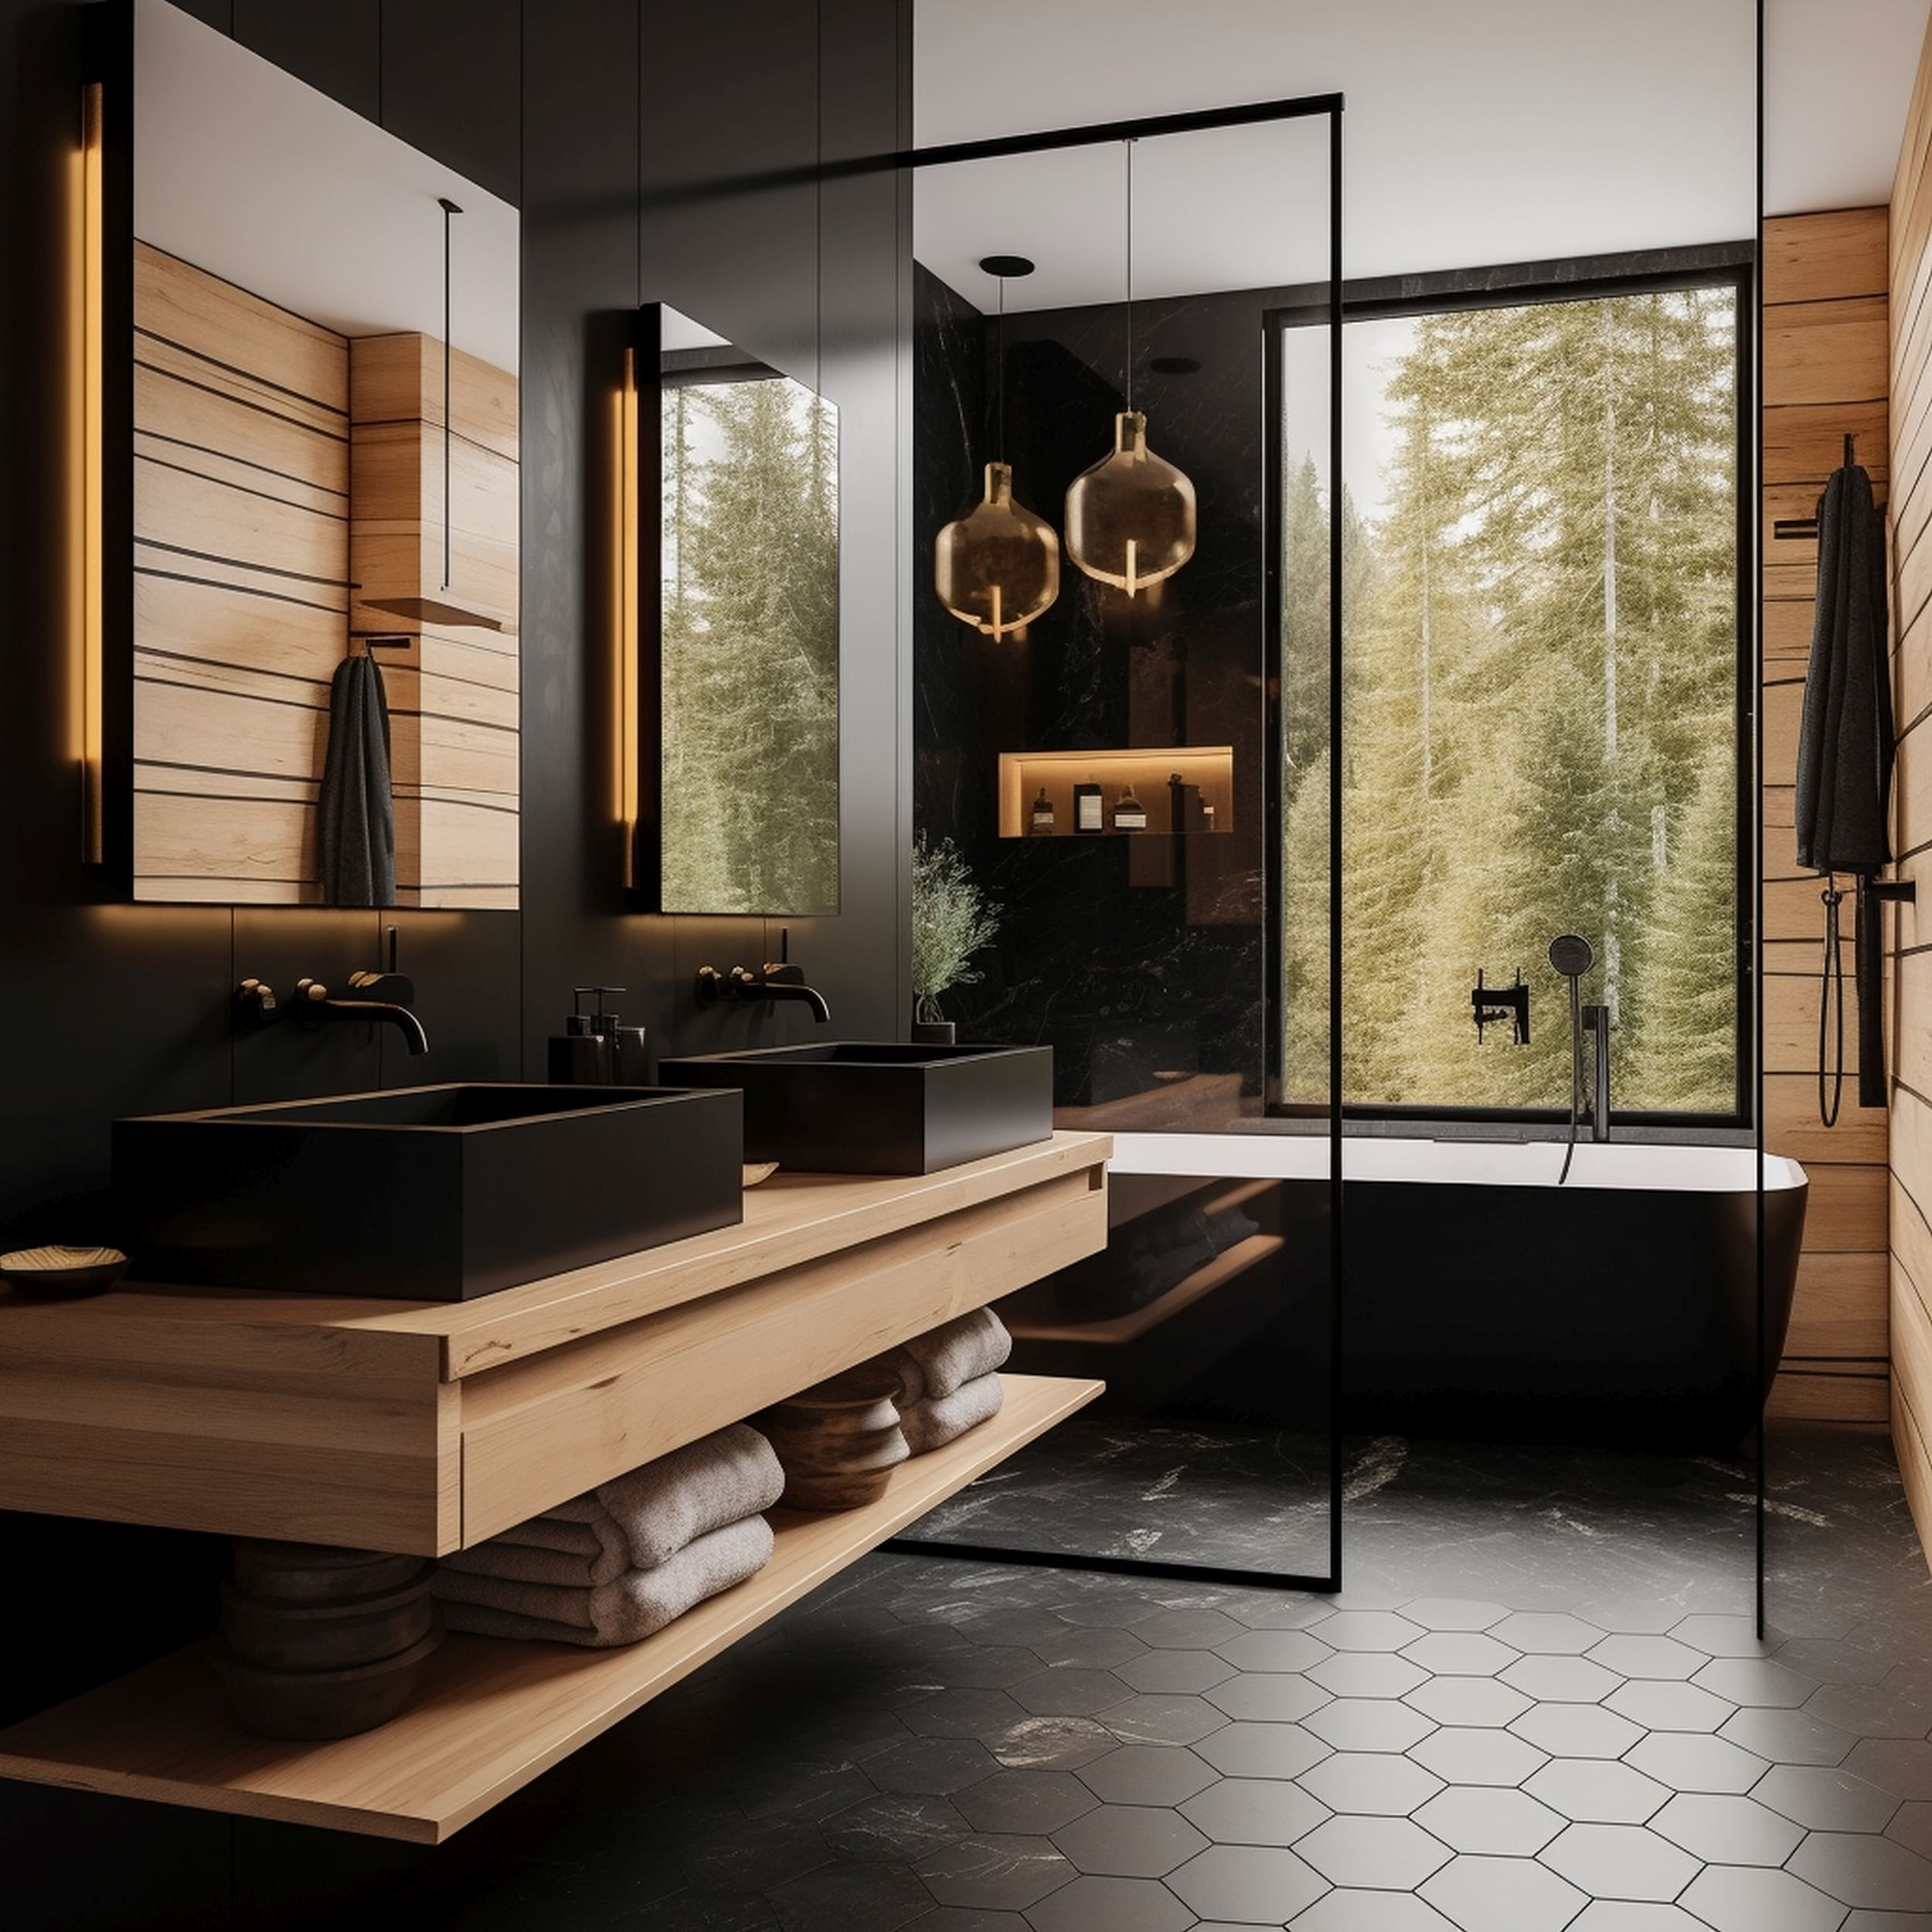 A Modern Bathroom With Matte Black Fixtures and a Matching Honeycomb Patterned Floor